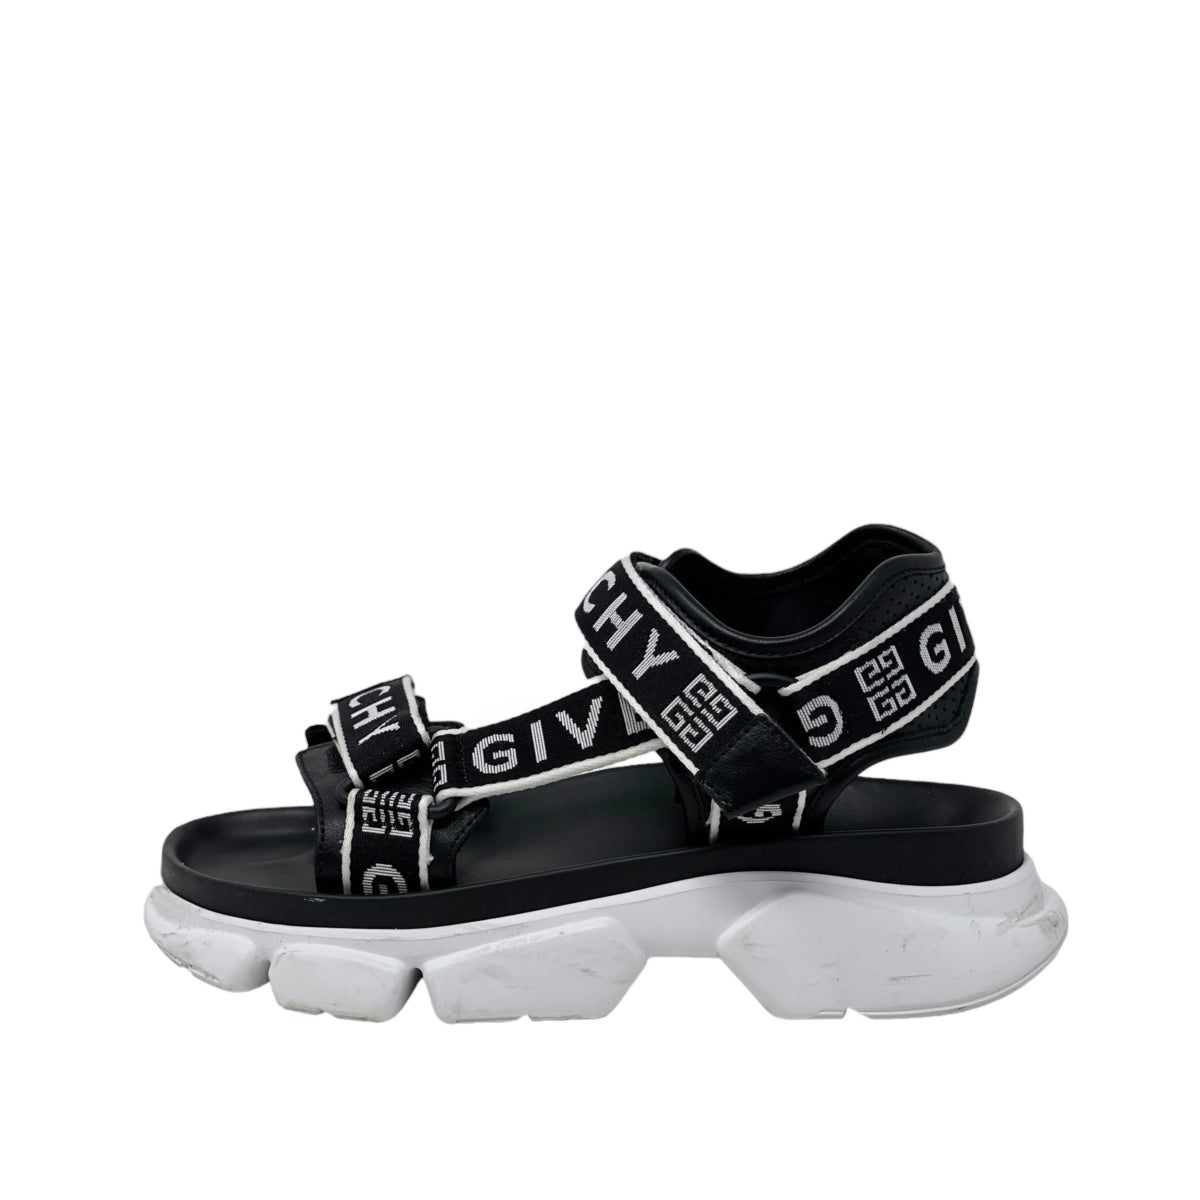 Givenchy Black Jaw Sport Sandals 39.5